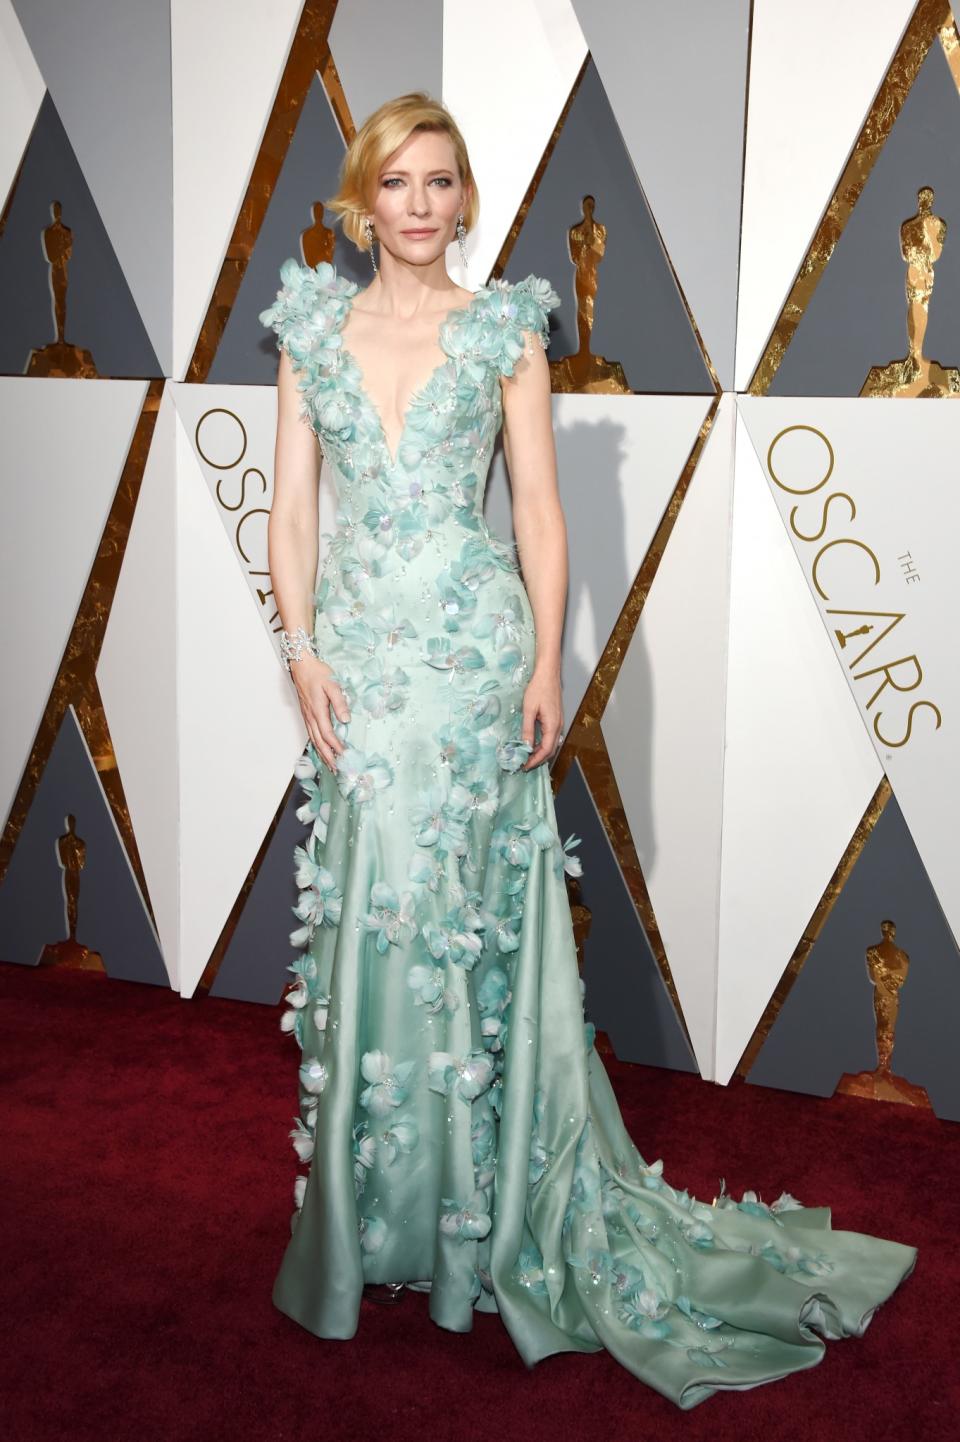 BEST: Cate Blanchett at the Oscars